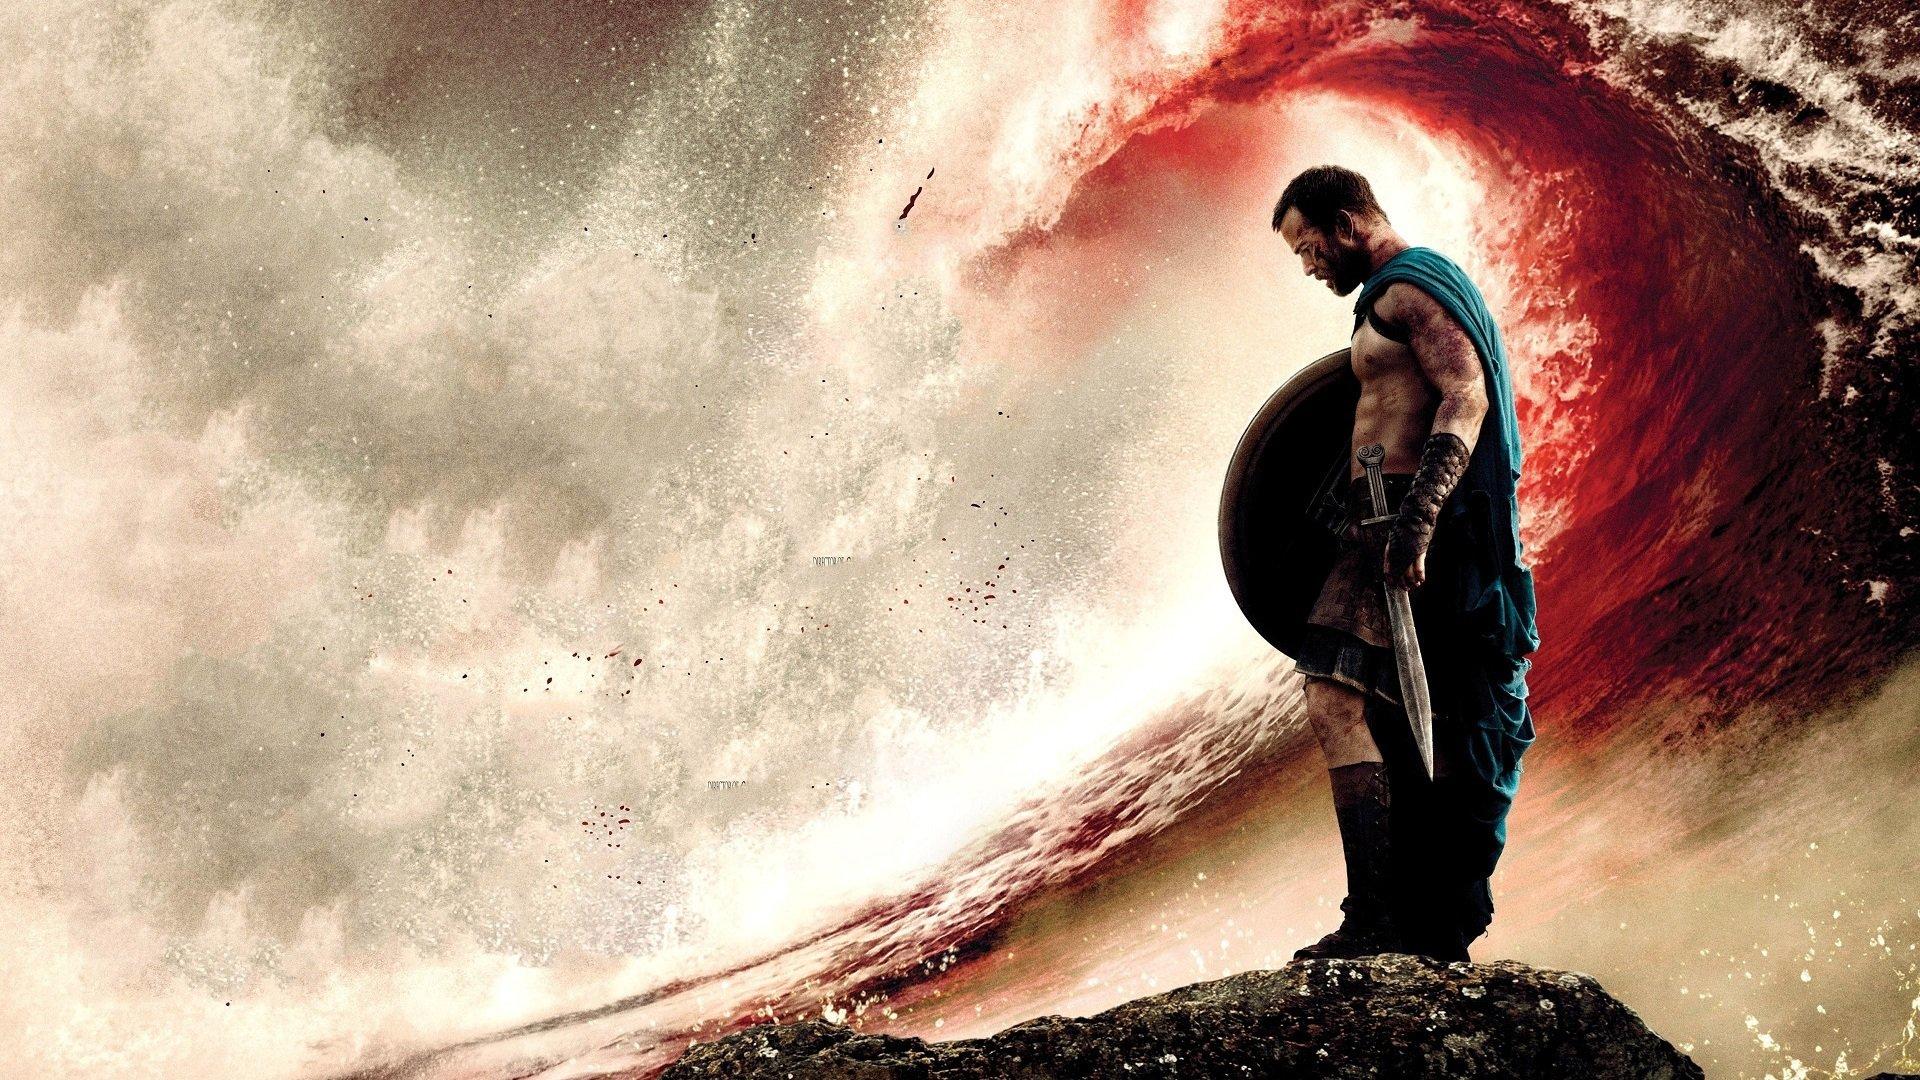 300: Rise of an Empire
